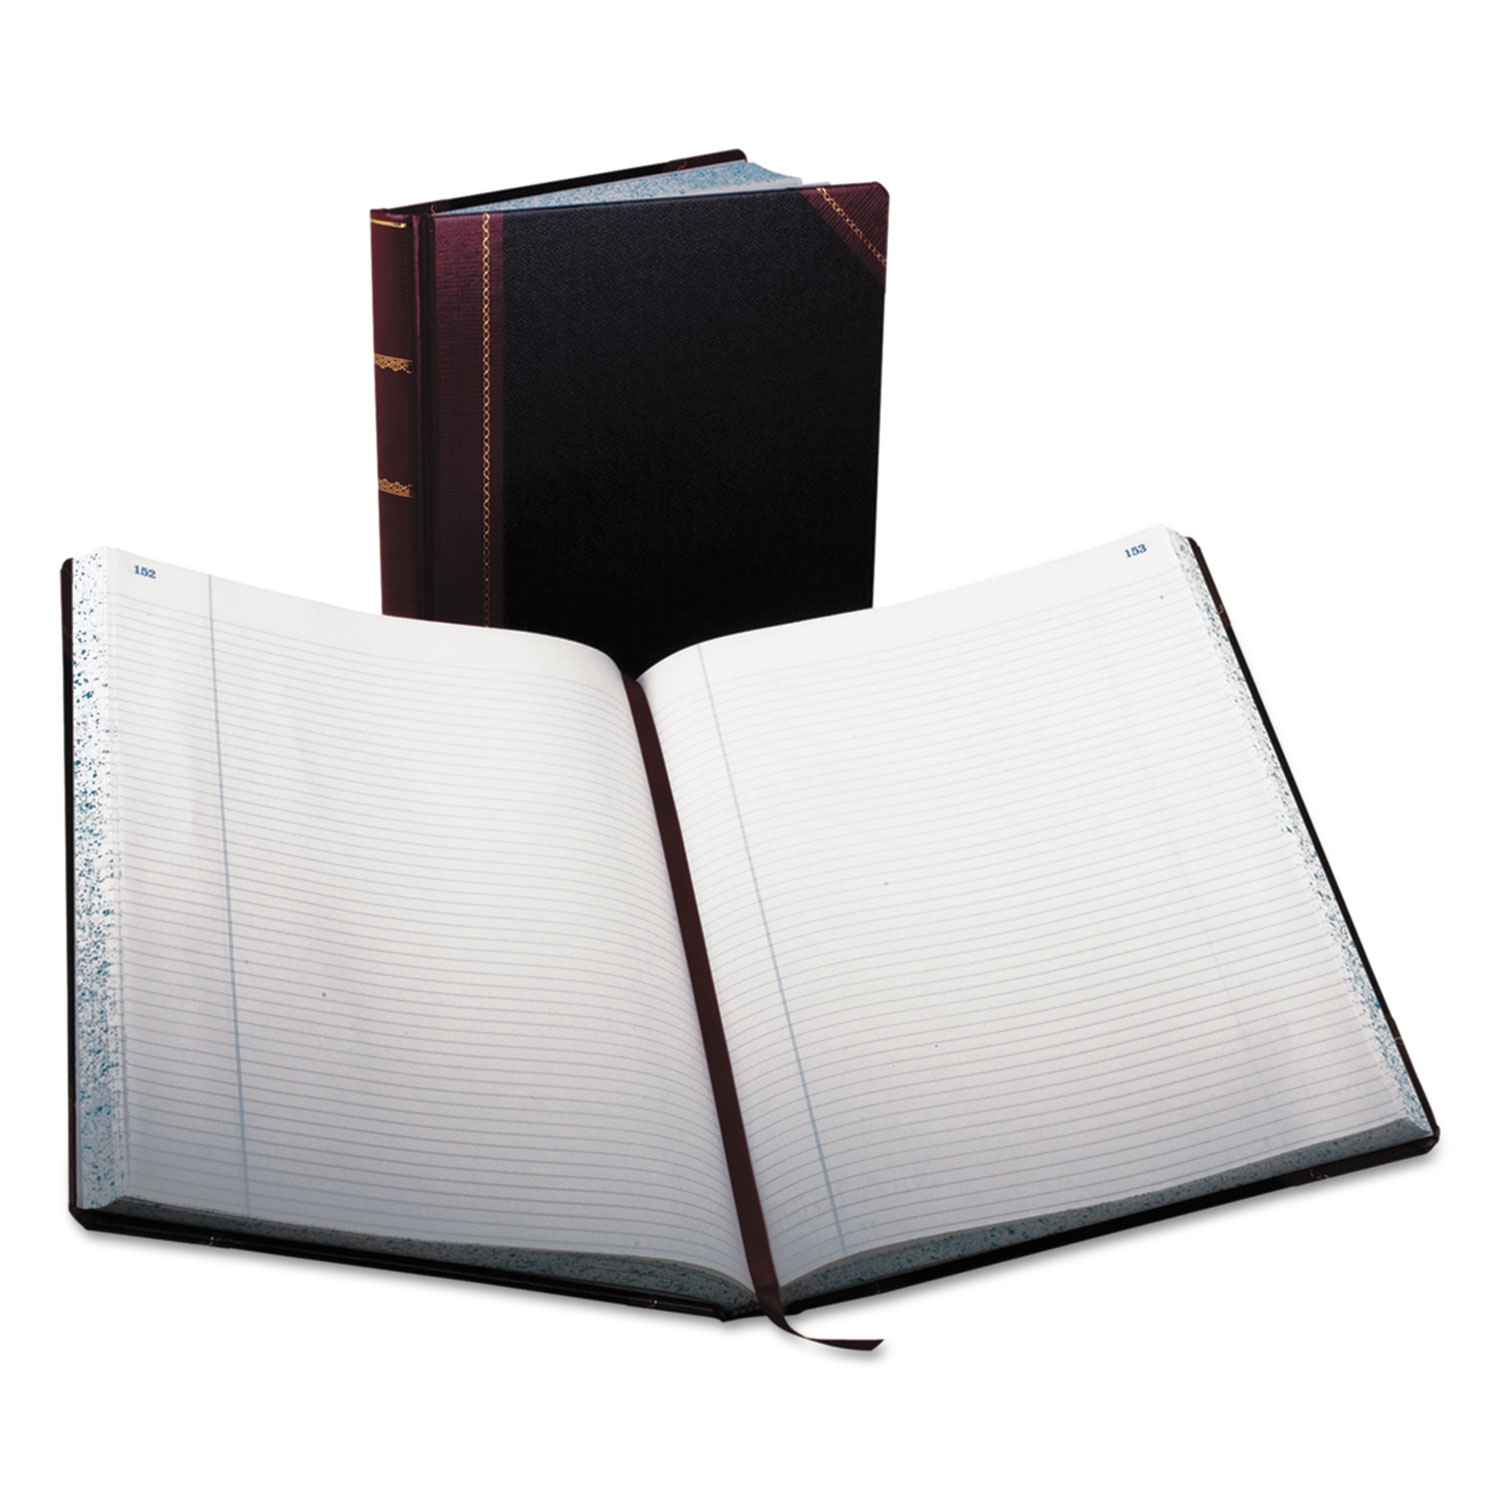  Boorum & Pease 23-300-R Record Ruled Book, Black Cover, 300 Pages, 10 7/8 x 14 1/8 (BOR23300R) 